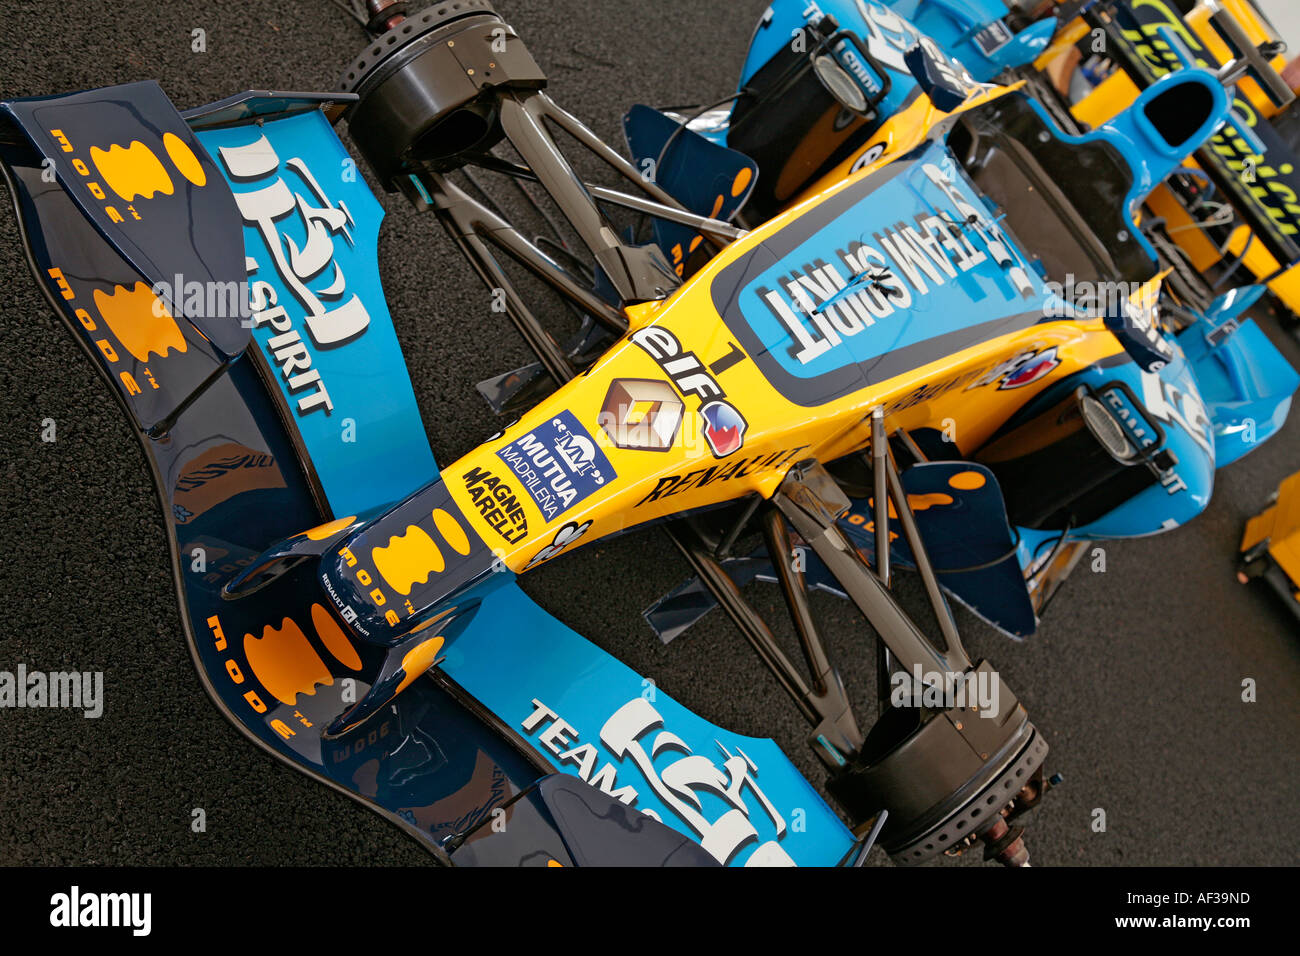 2006 Renault R26 F1 car on display at the Goodwood Festival of Speed. Stock Photo